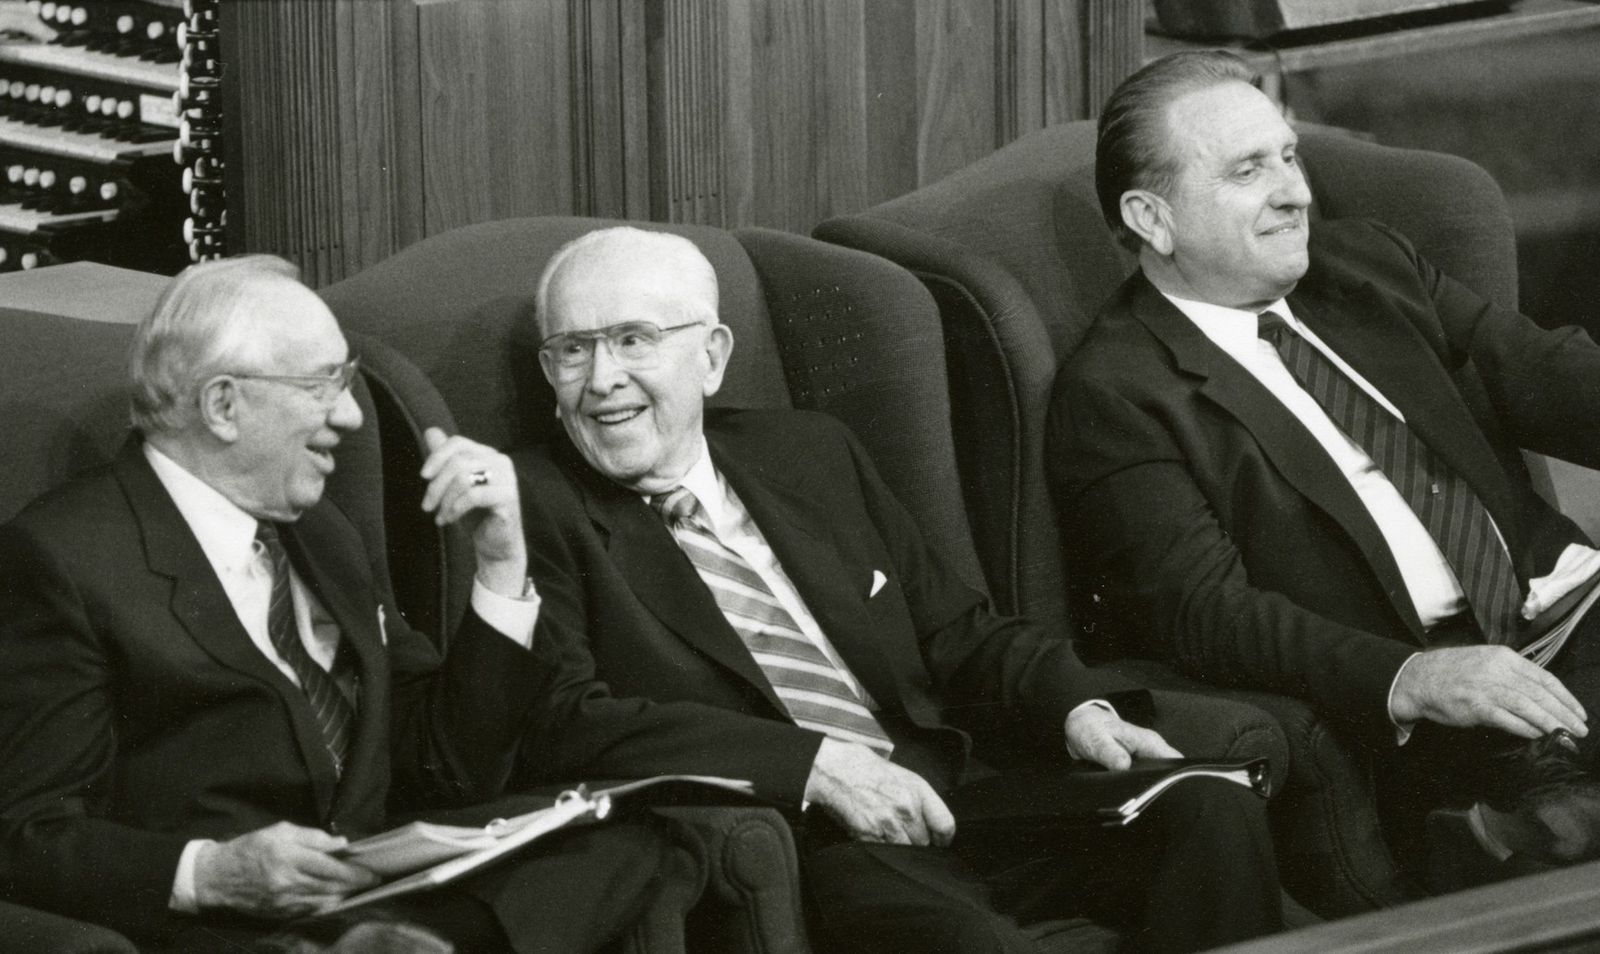 Ezra Taft Benson, Gordon B. Hinckley and Thomas S. Monson seated on the stand during General Conference.